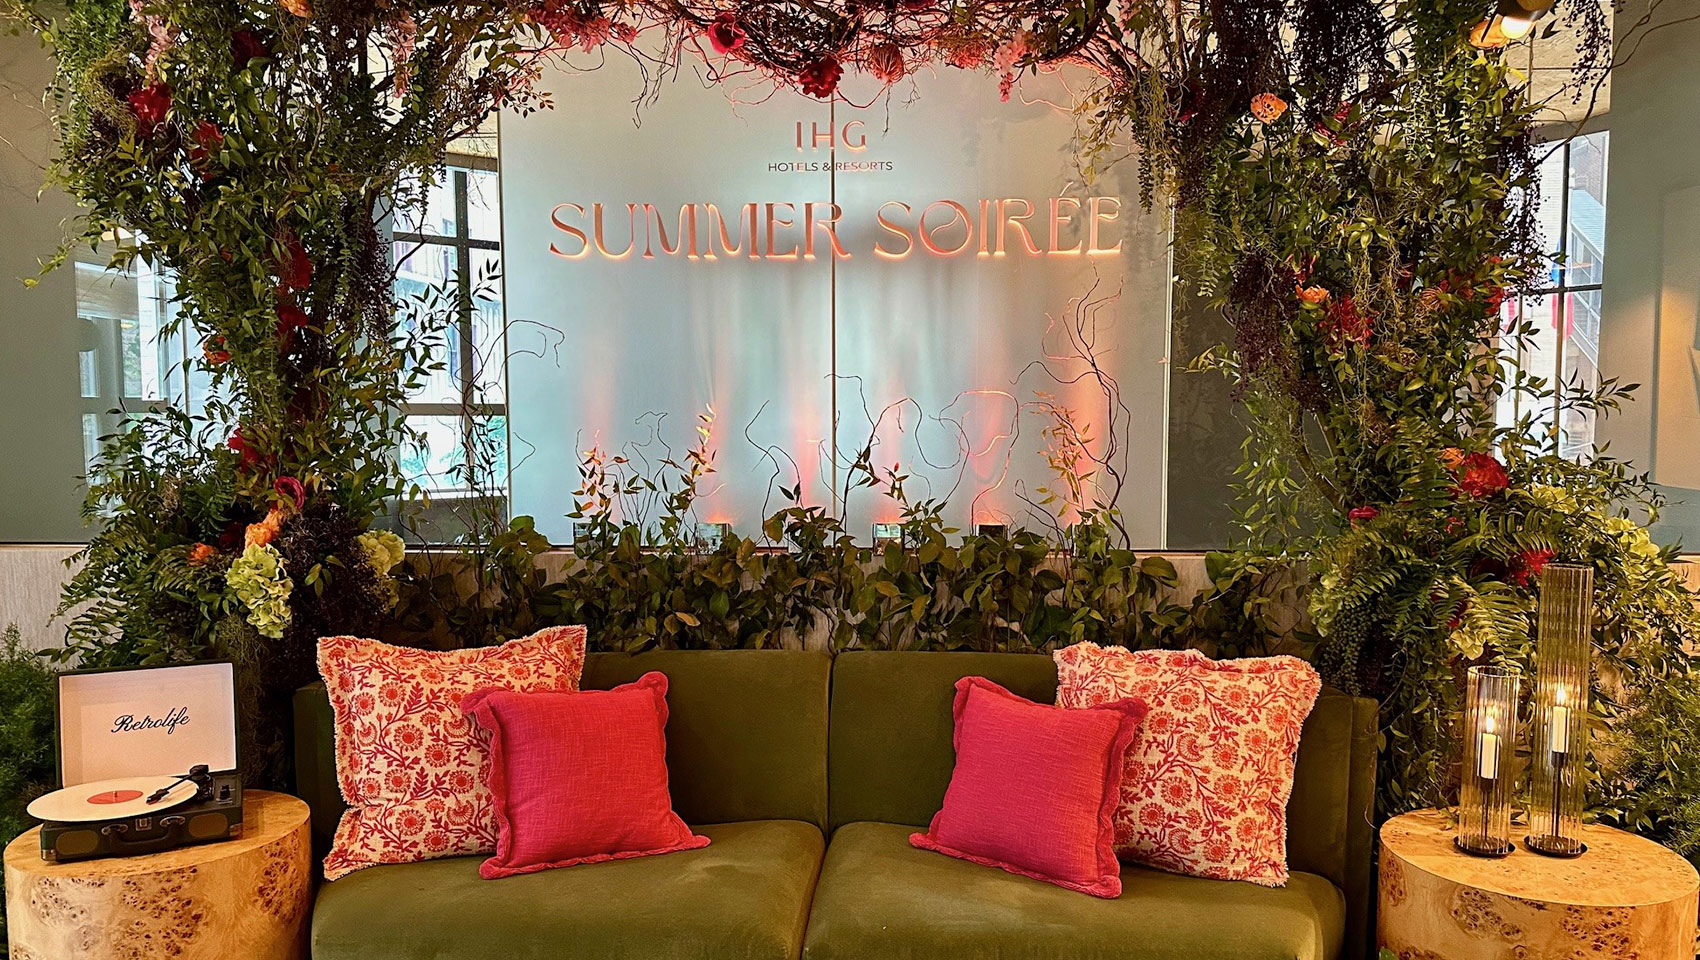 Summer Soiree signage + sofa and record player